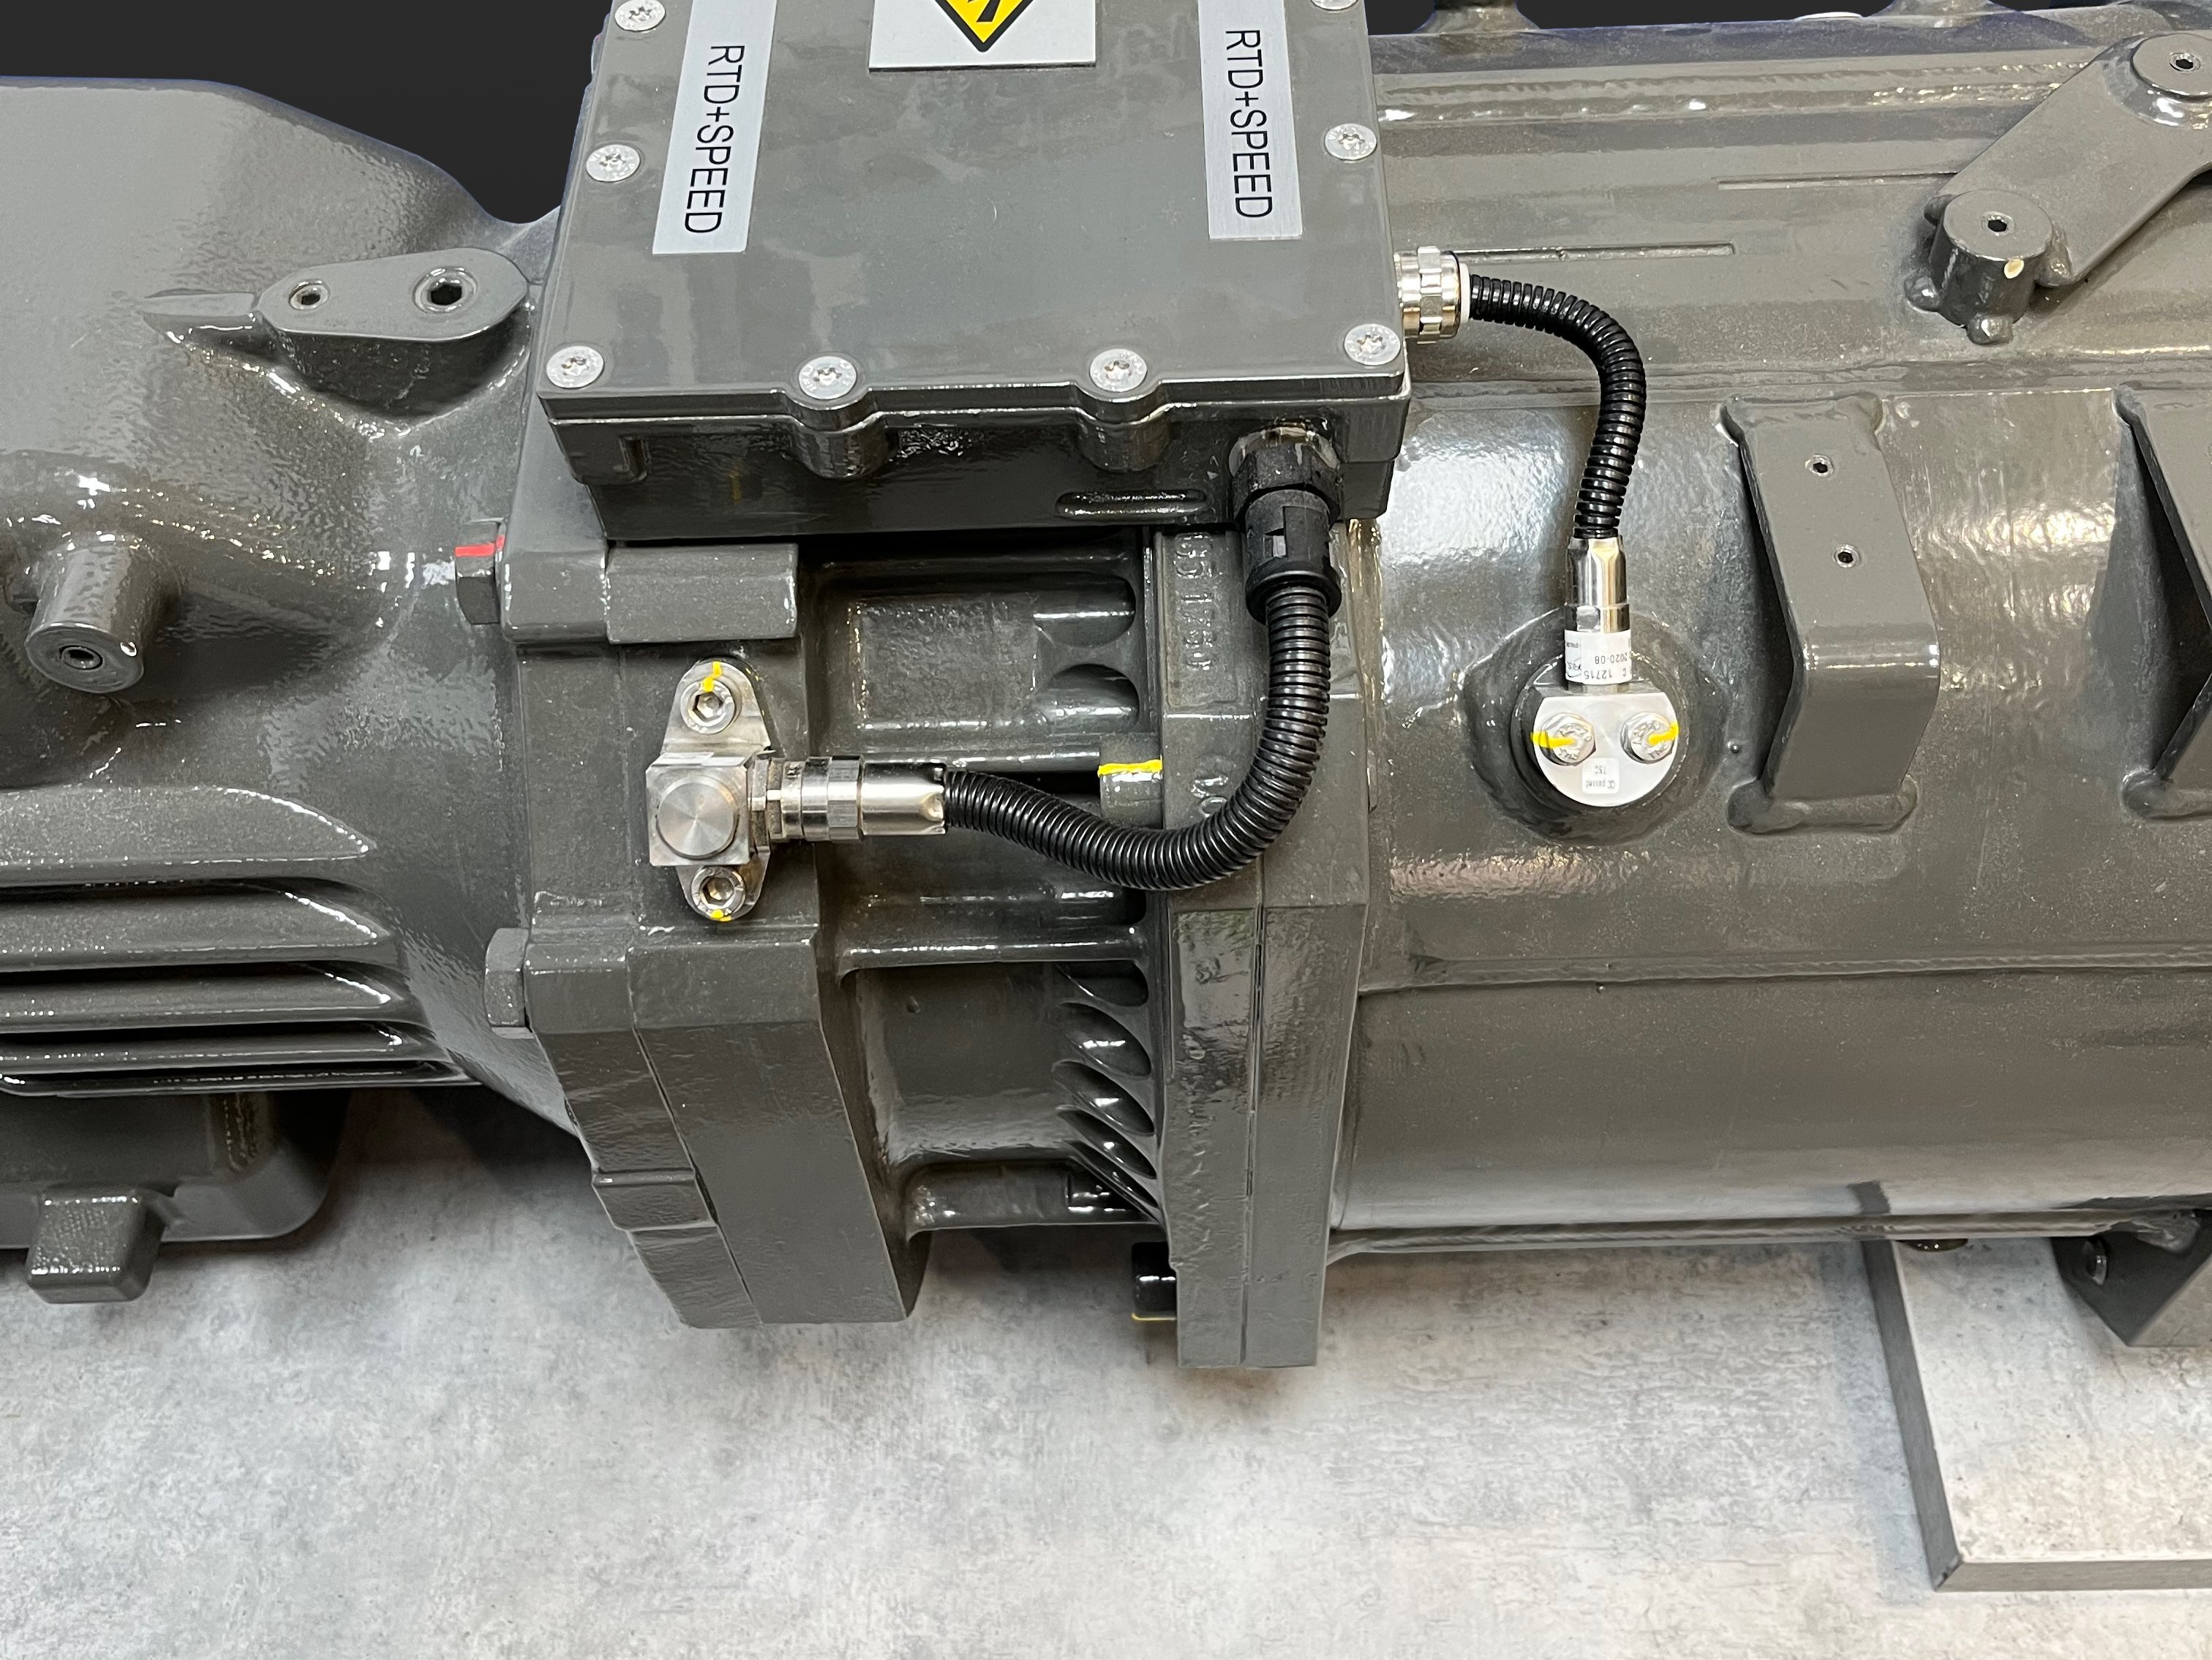 The image shows a traction motor of a railvehicle with a speed and a temperture sensor mounted on the motor.